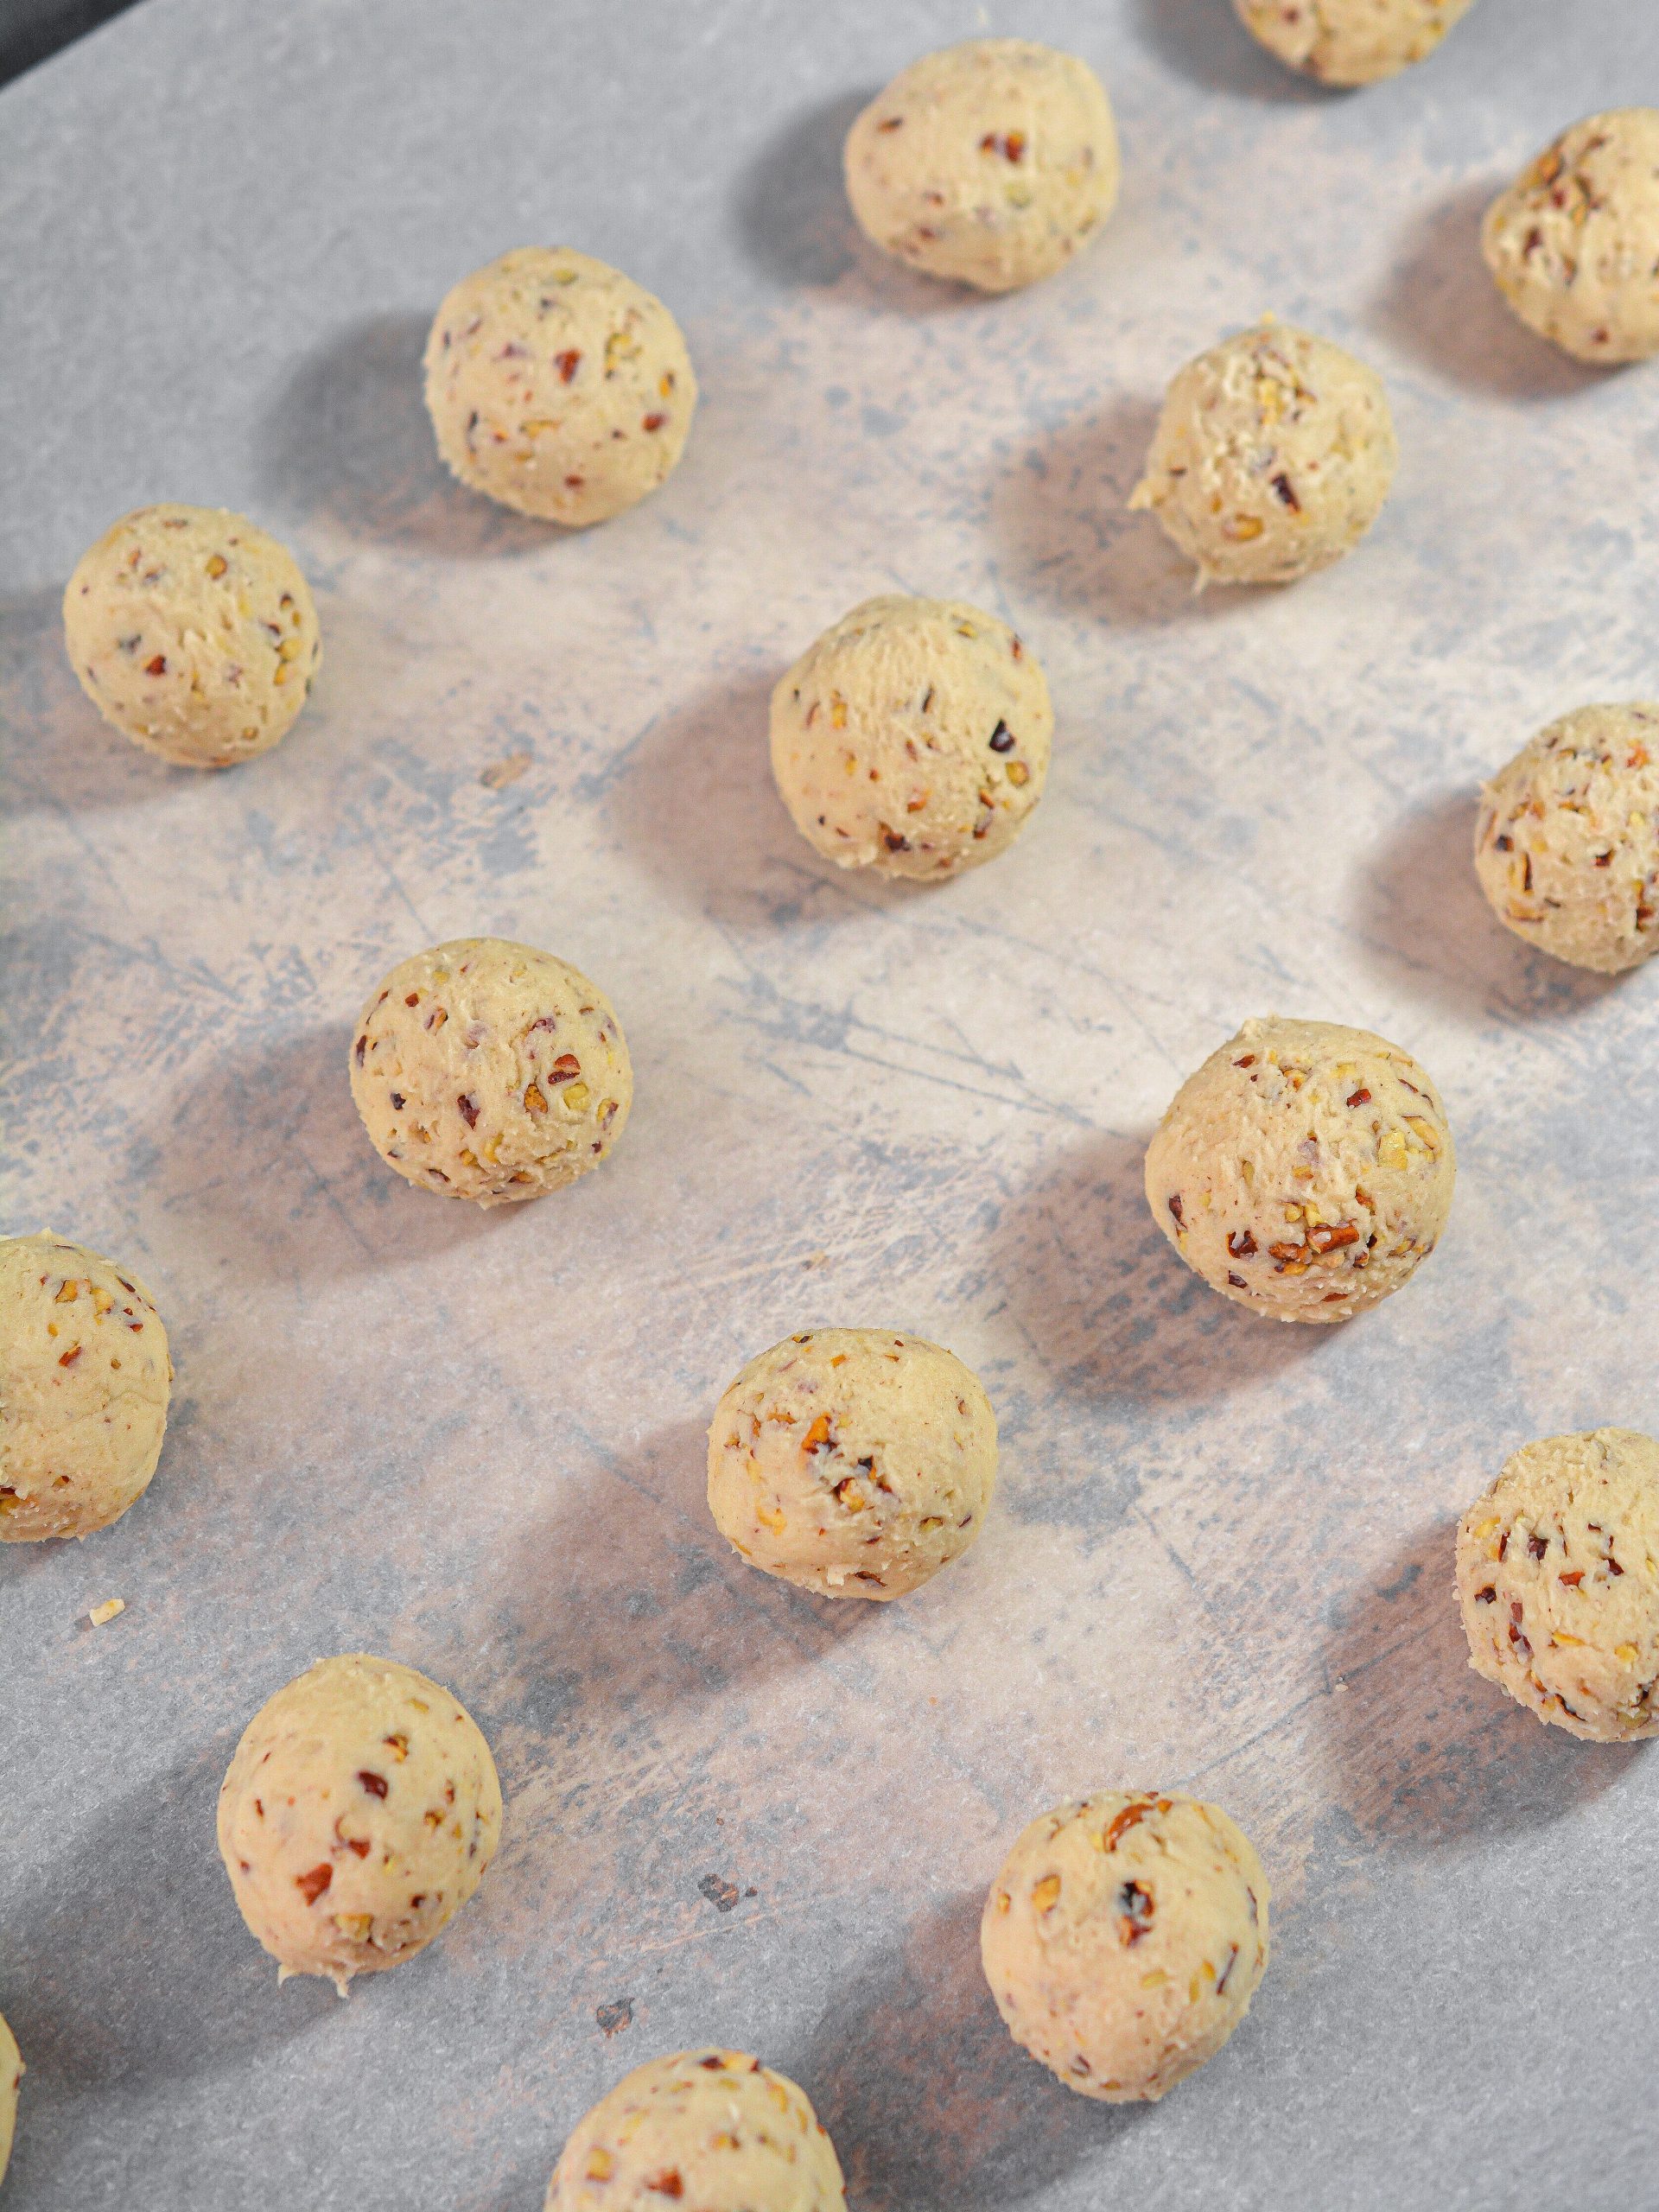 Wet your hands and form the dough into 36 evenly-sized balls of dough.